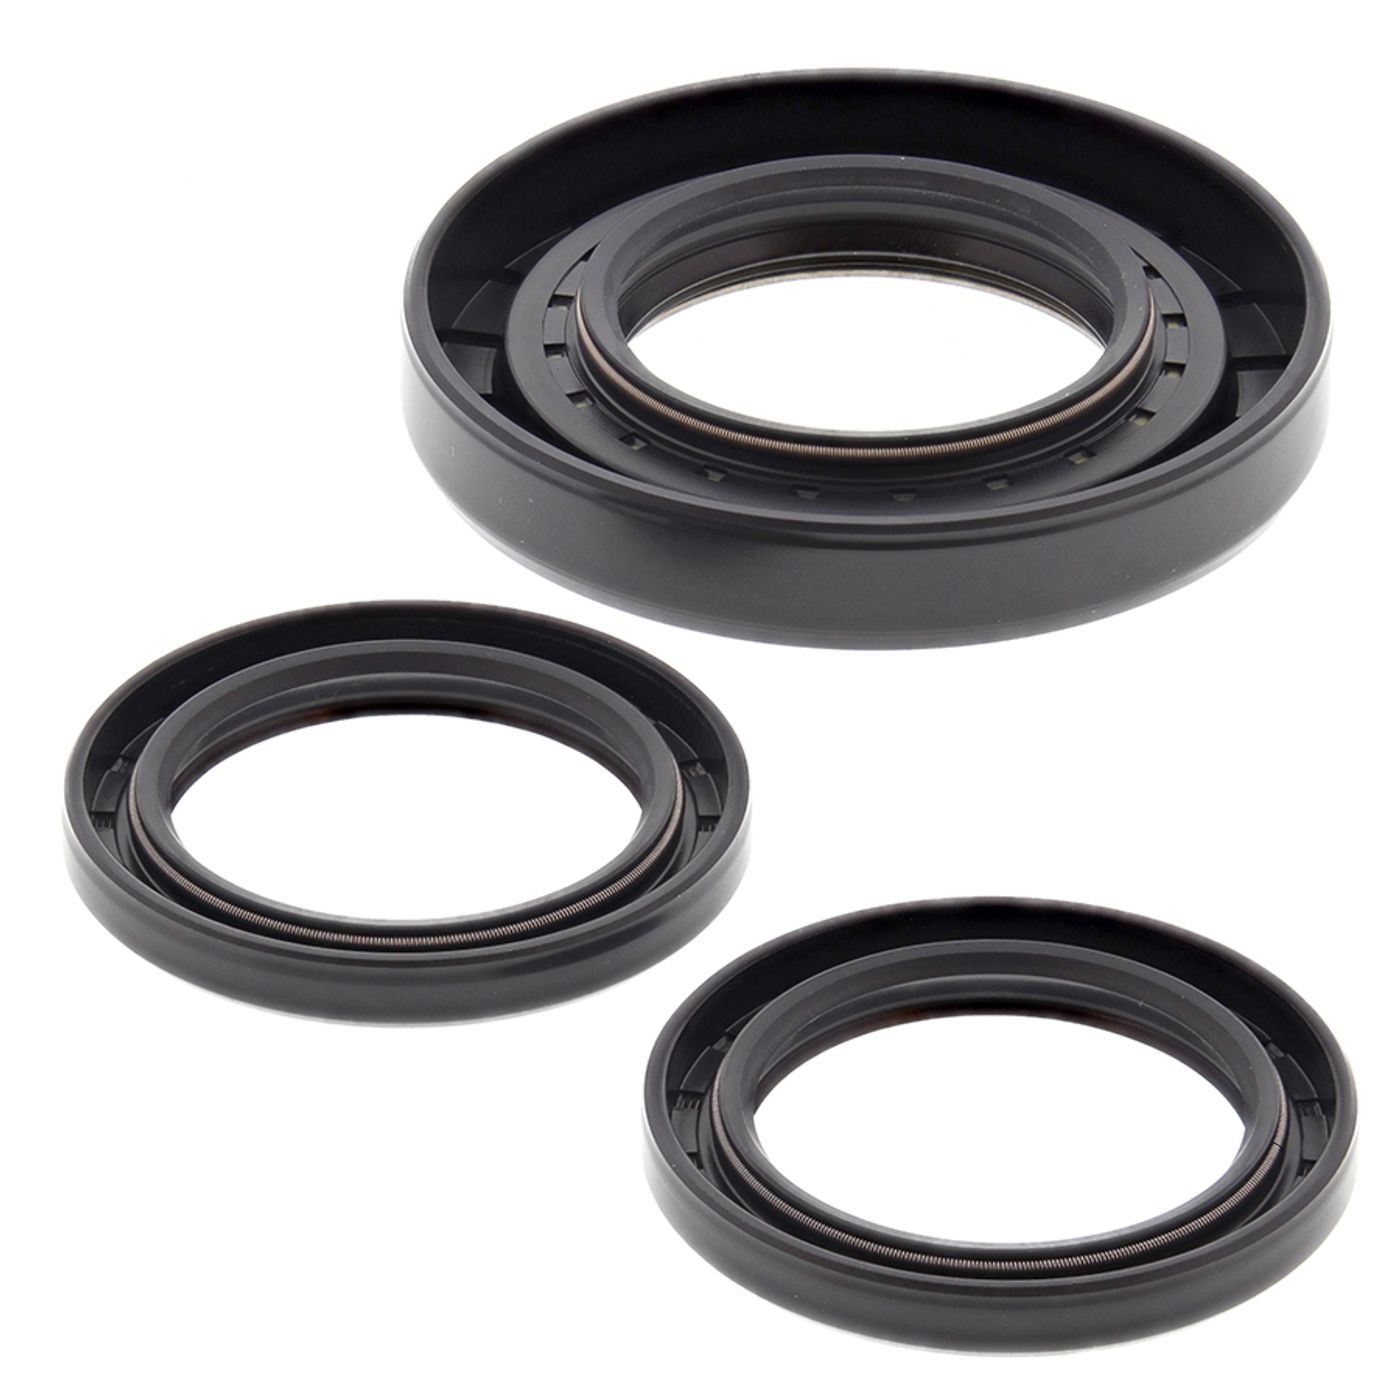 Wrp Diff Seal Kits - WRP252079-5 image